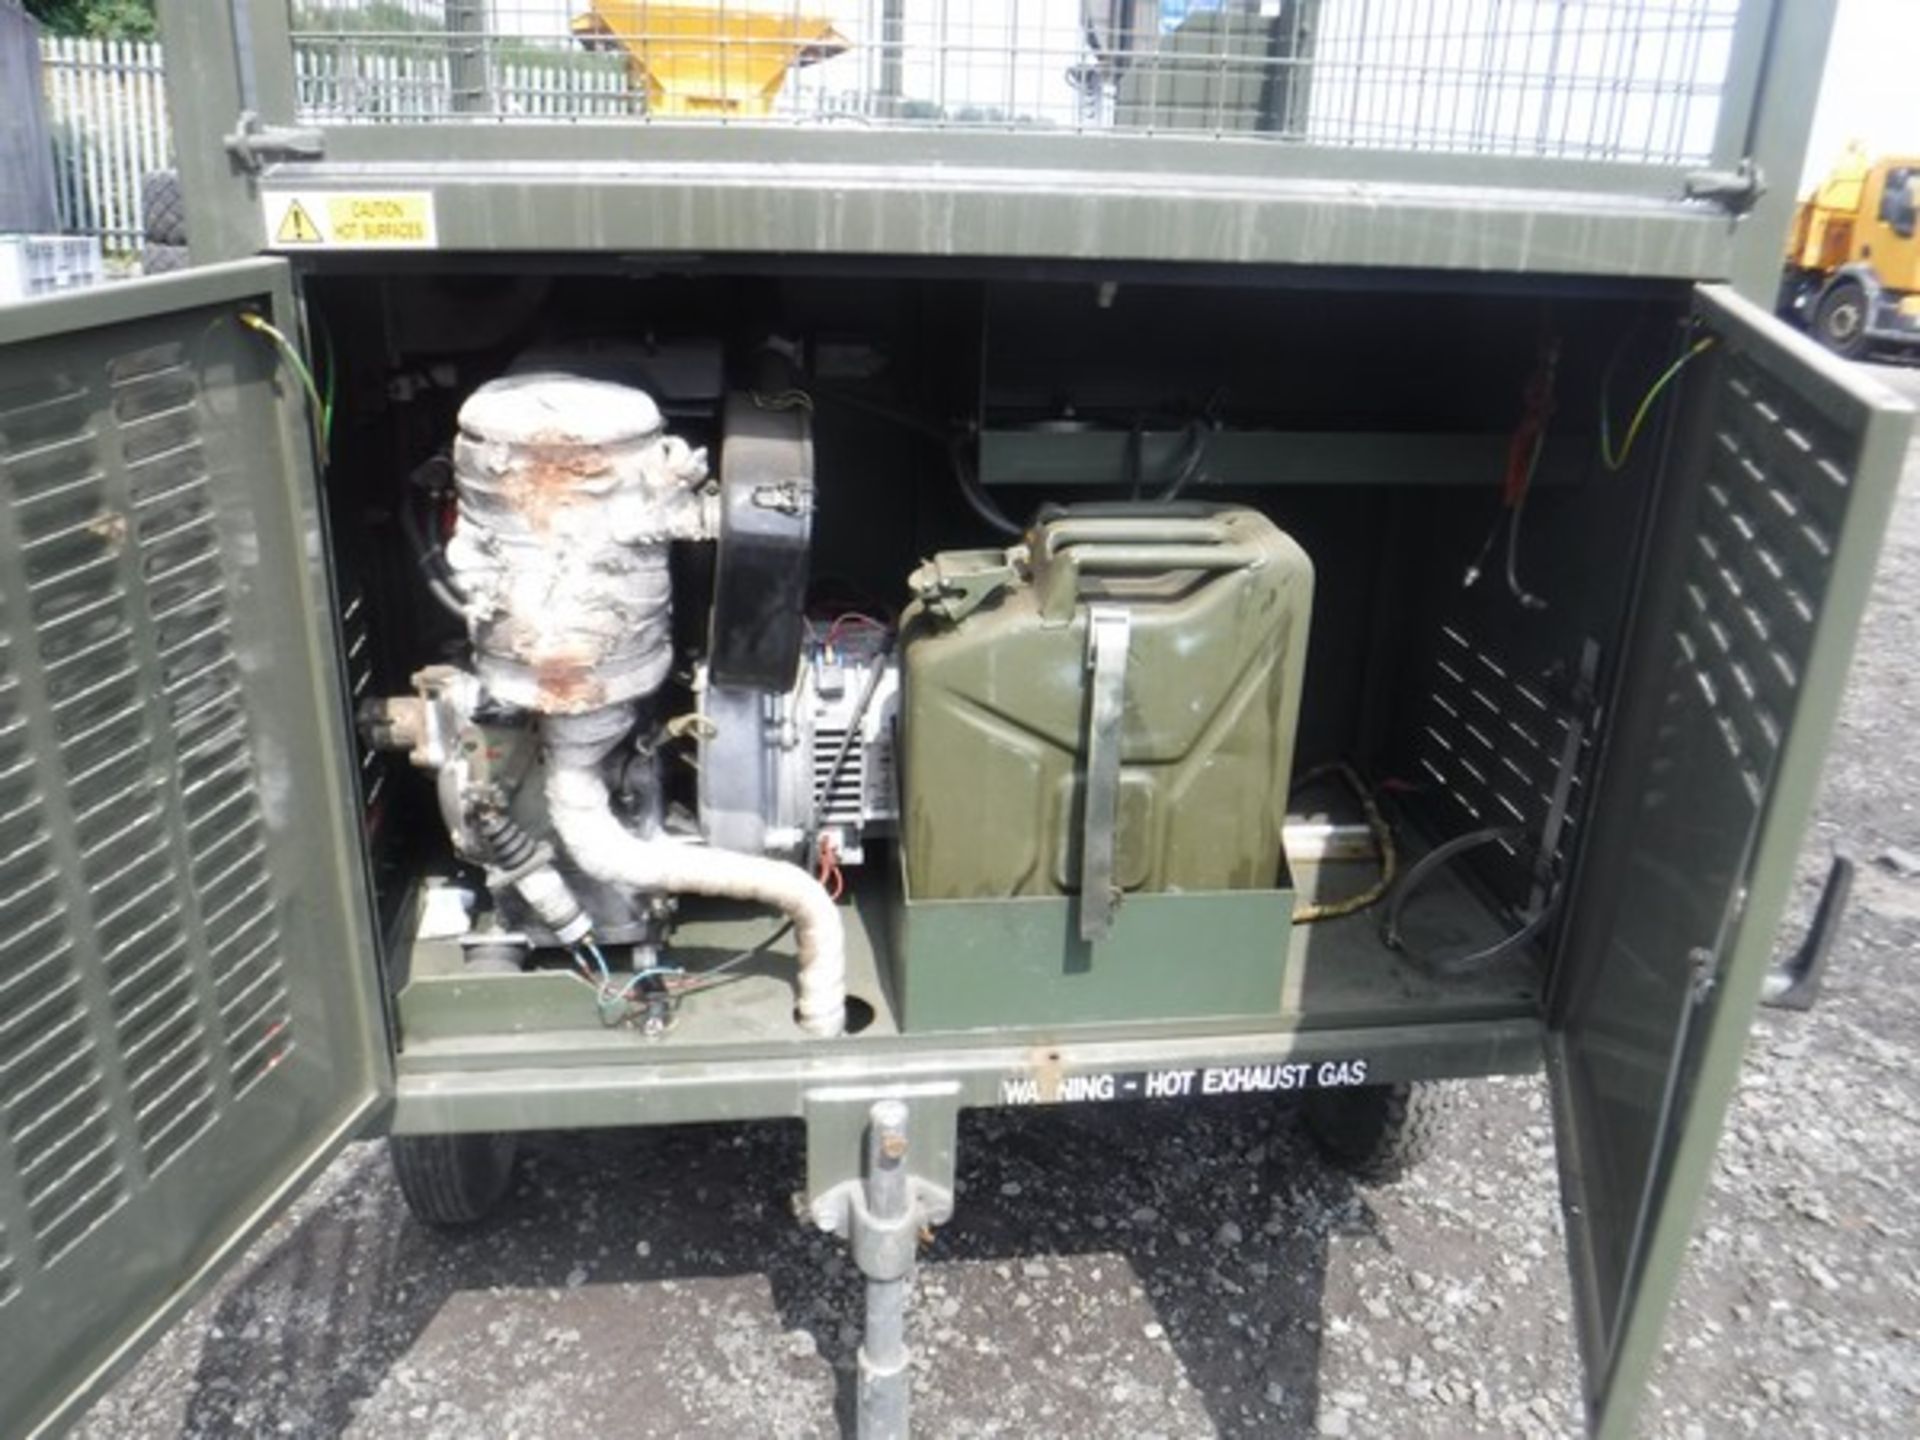 2000 DEHUMIDIFICATION trolley for small aircraft with Lister Petter diesel engine generator 1301hrs - Image 3 of 6